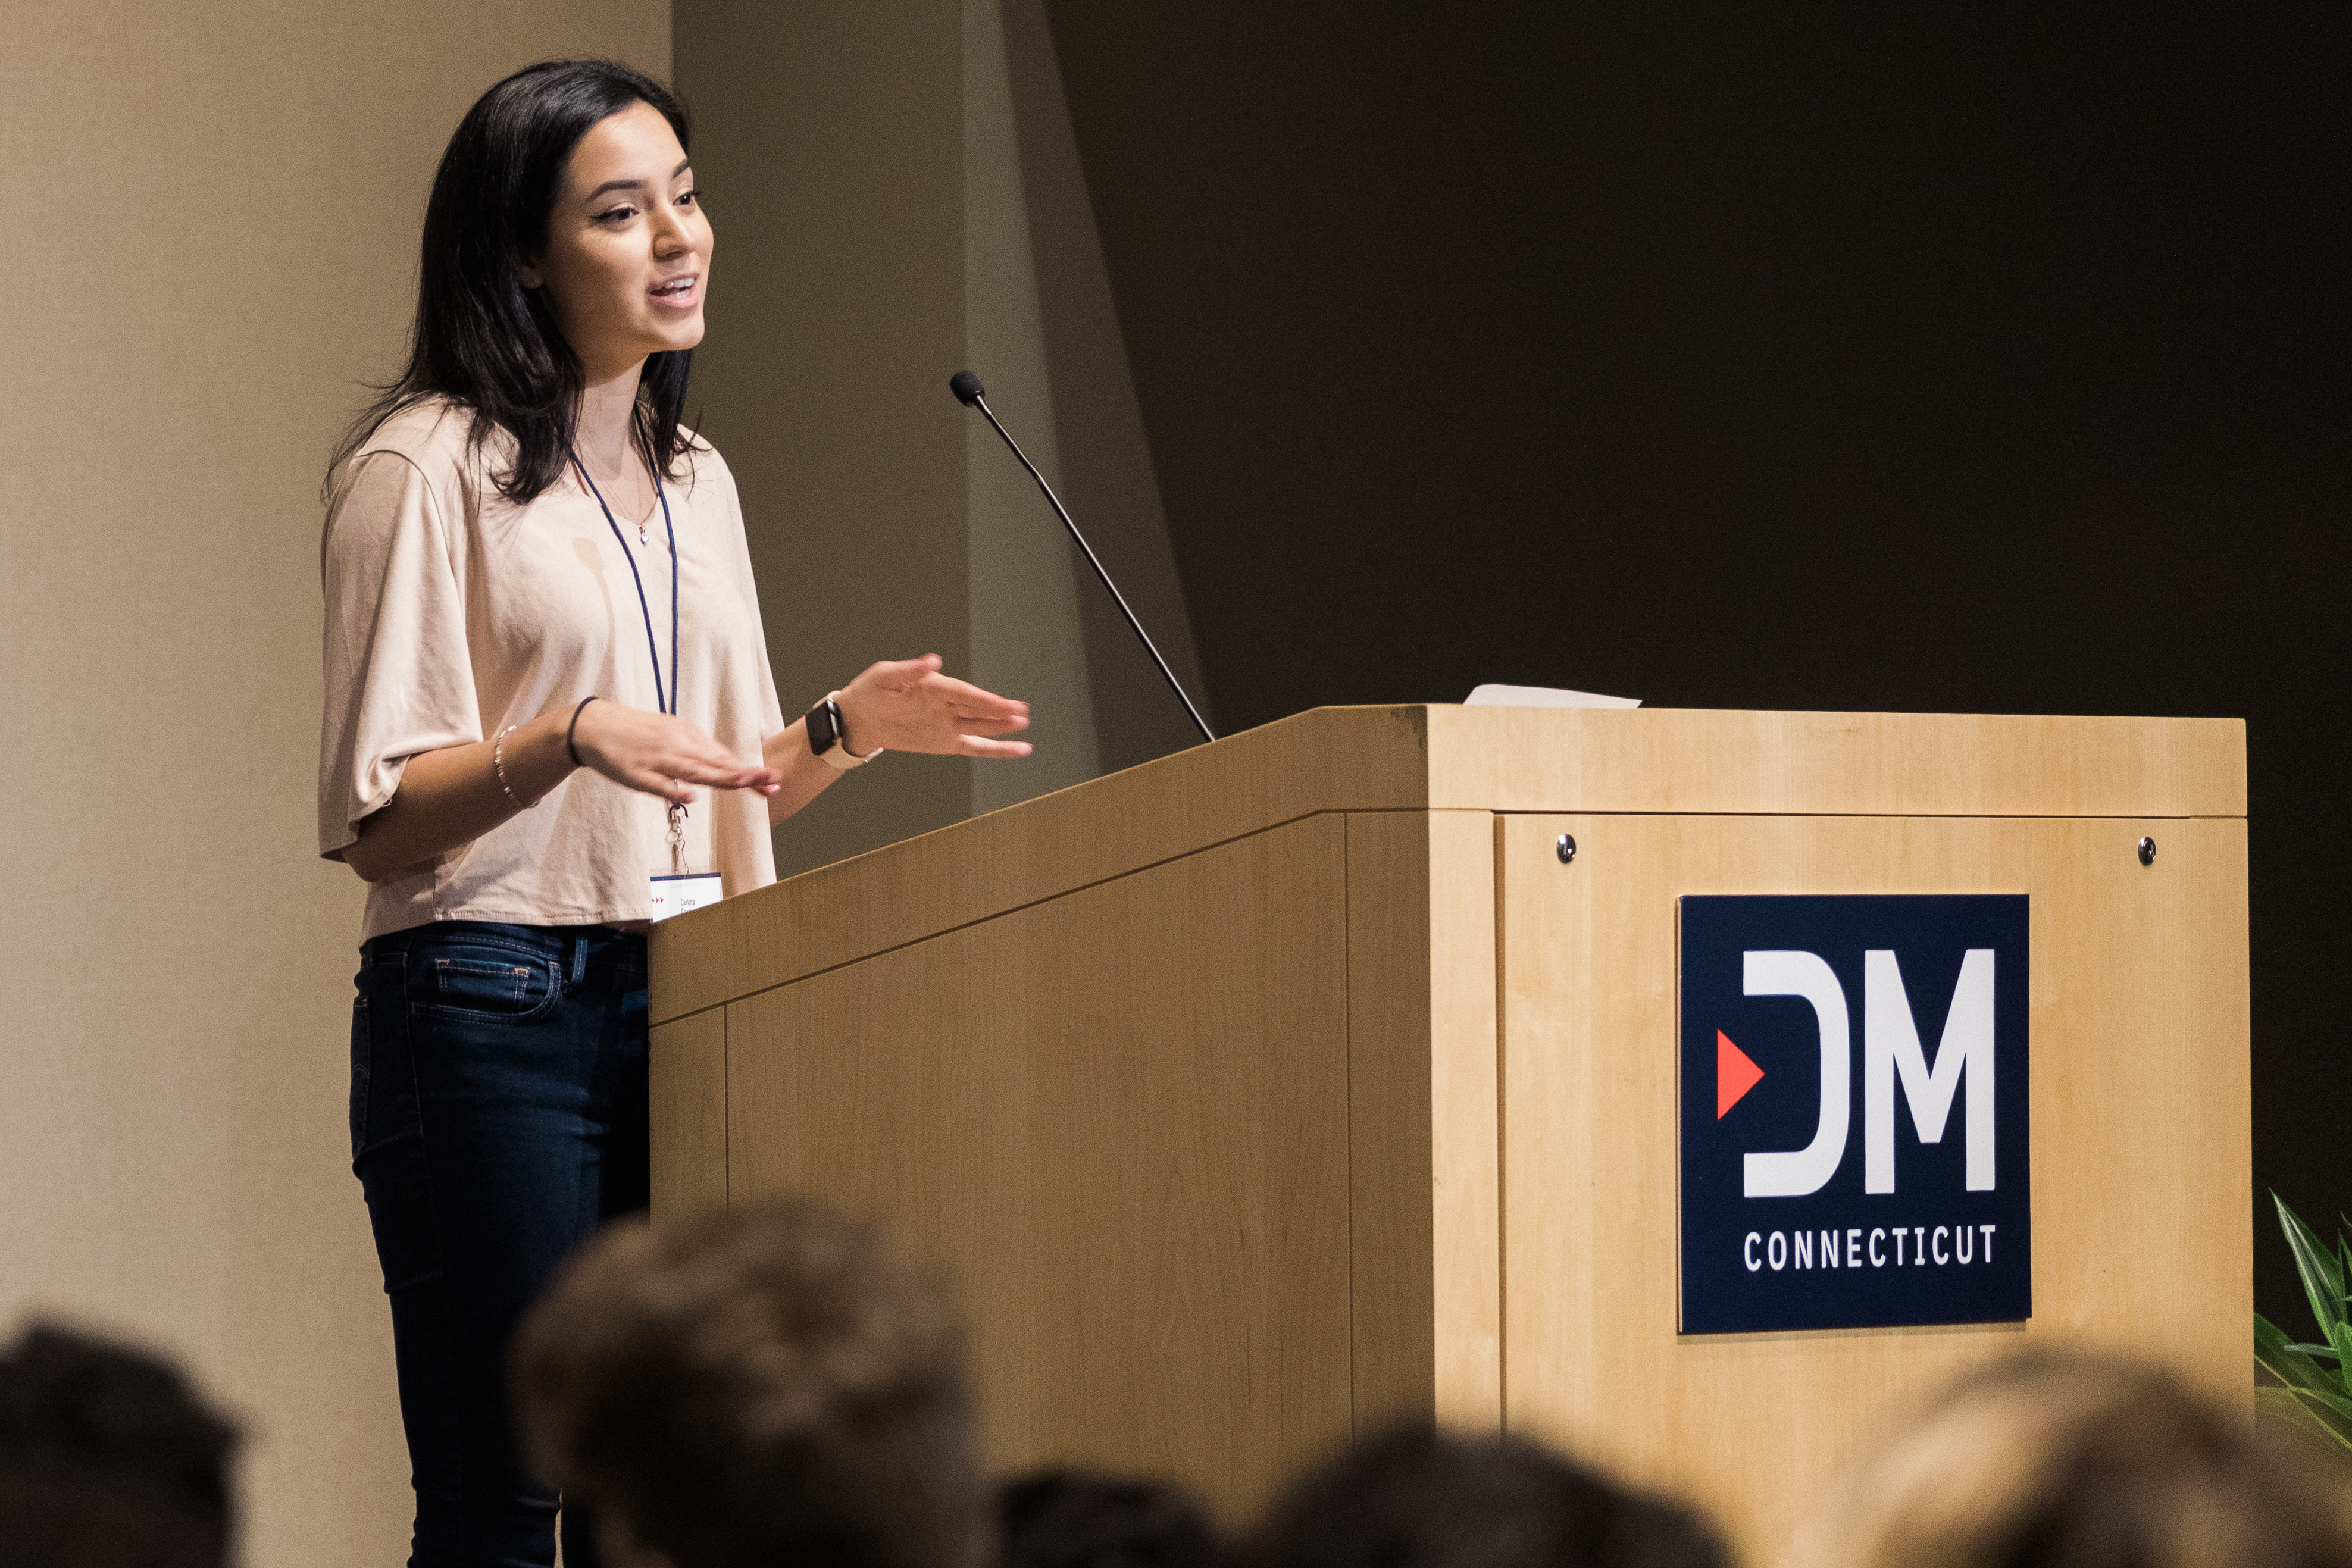 Carlotta Charles, user interface/user experience (UI/UX) designer with Cigna Health, spoke to students, faculty and industry professionals during the Digital Media CT Summit held at UConn’s Stamford campus. (Cat Boyce SFA ‘15, ’19/ UConn Photo)